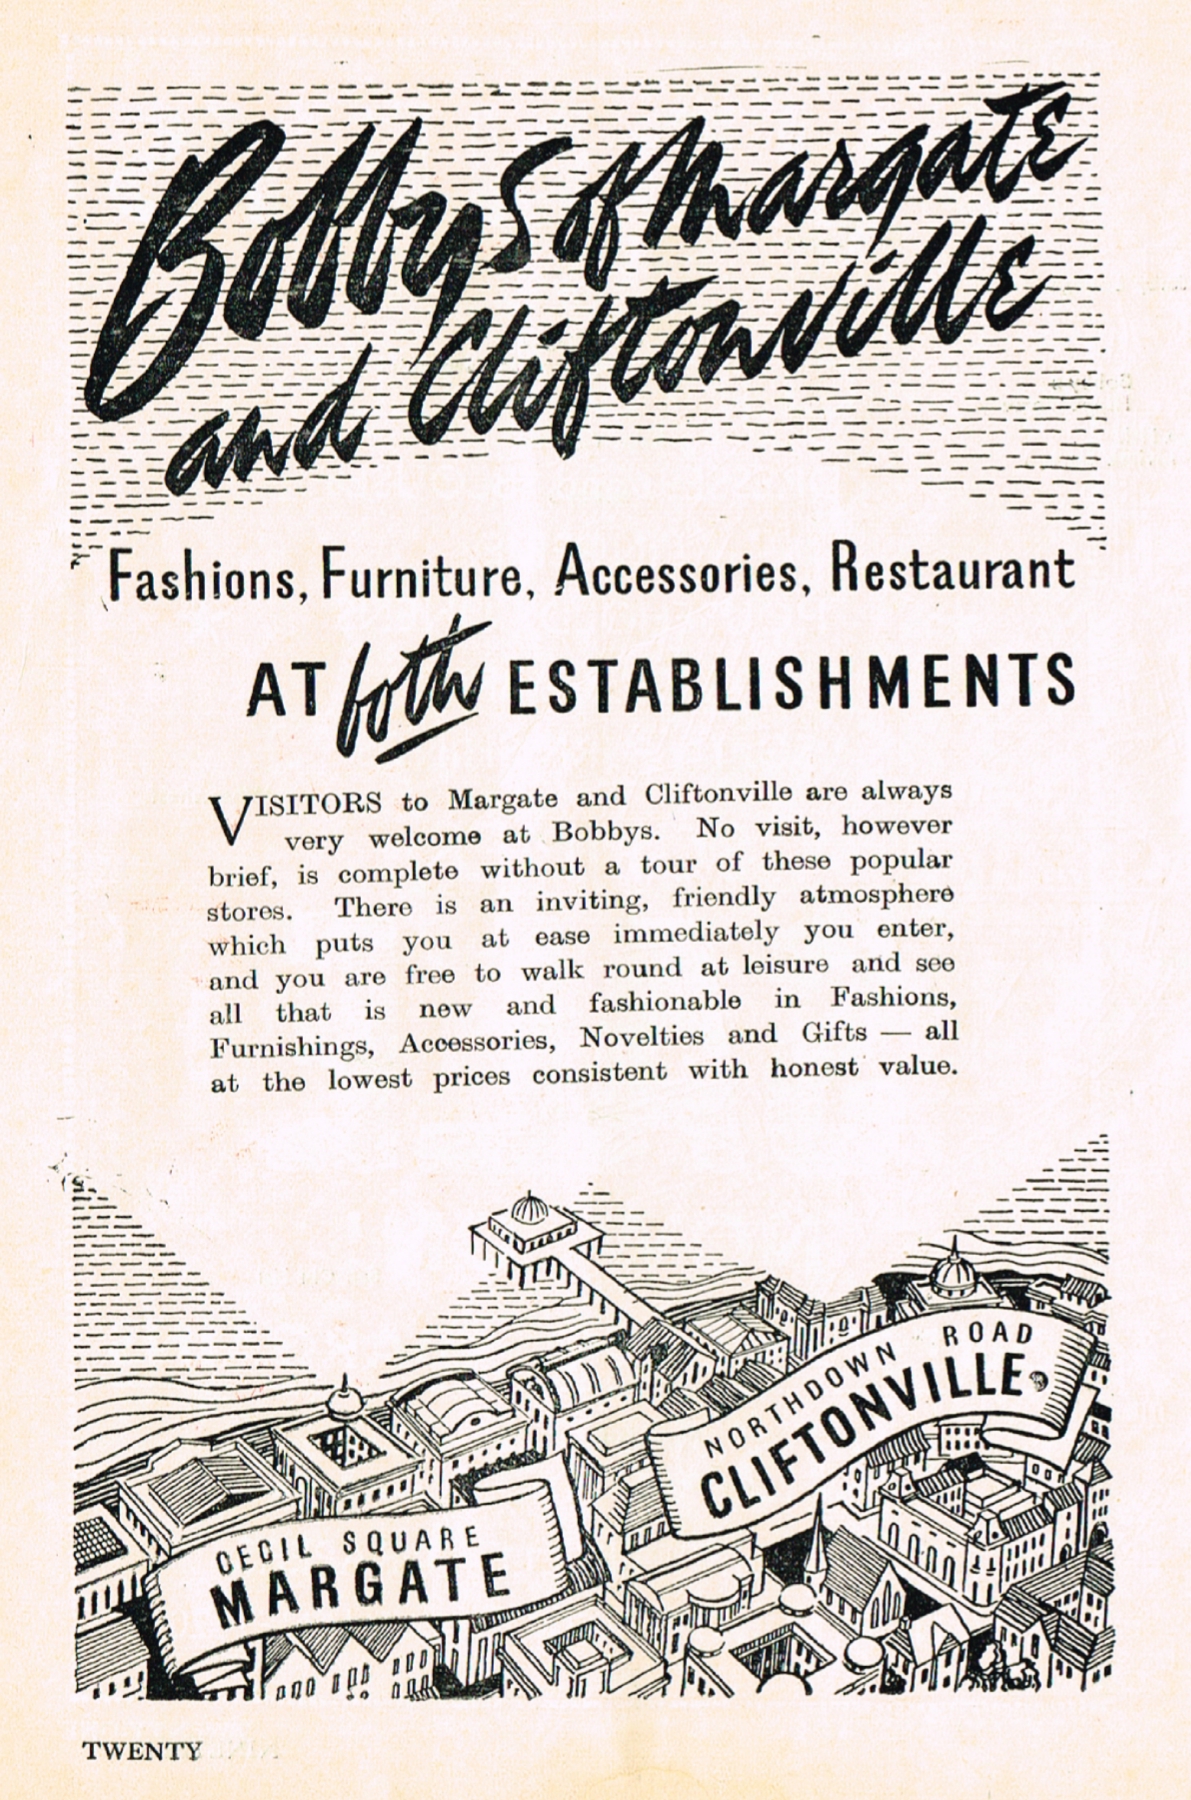 Advertisement for Bobby's at Margate and Cliftonville